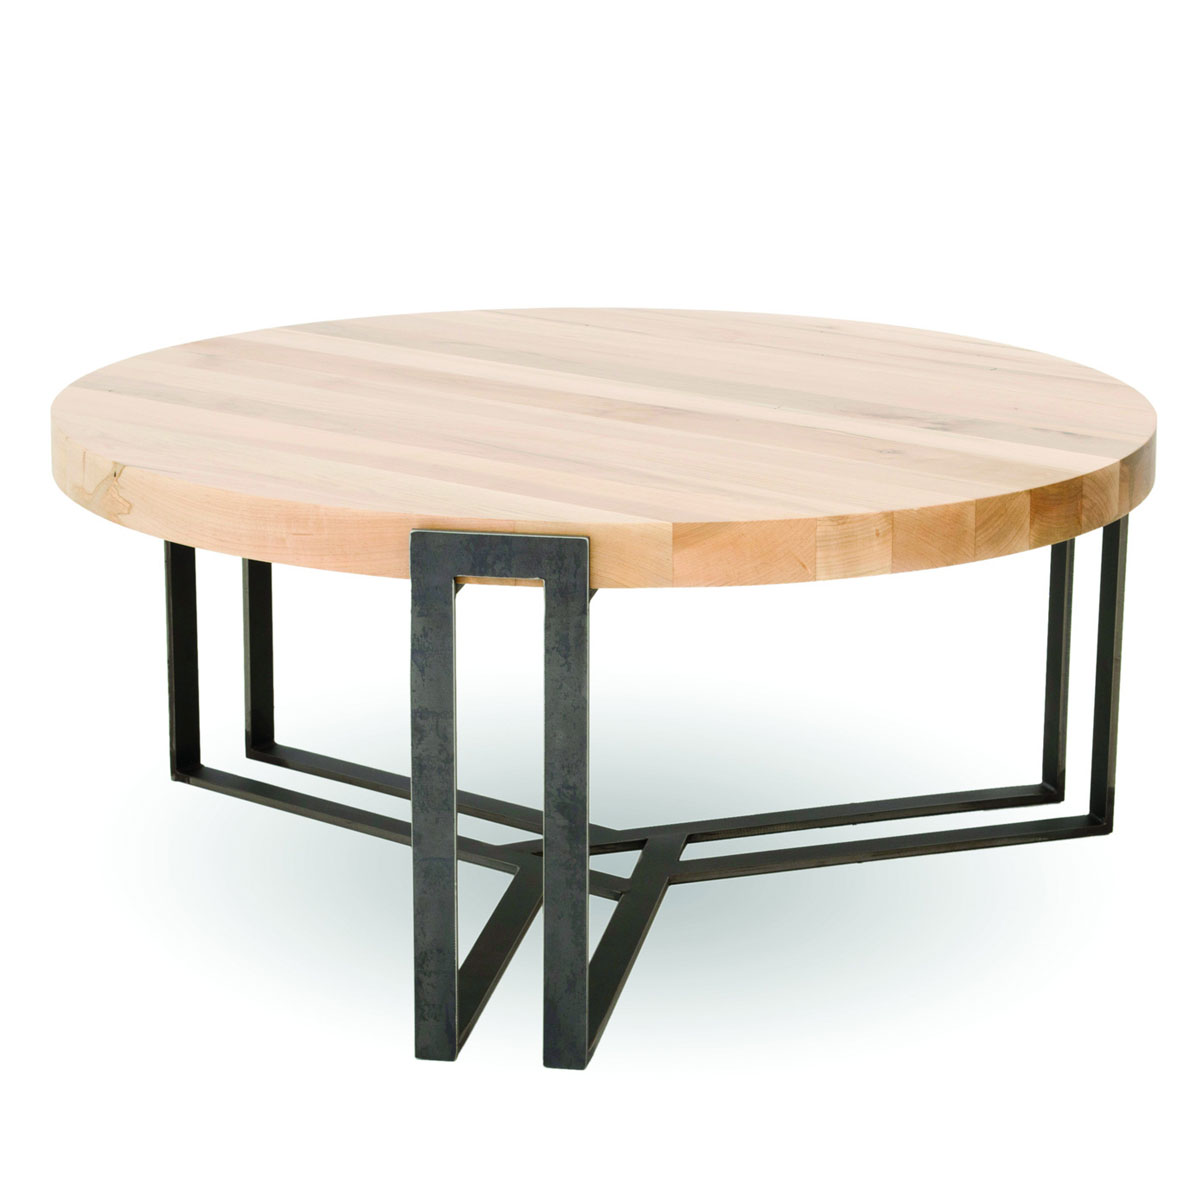 Charleston Forge Watson 42 inch Round Cocktail Table 